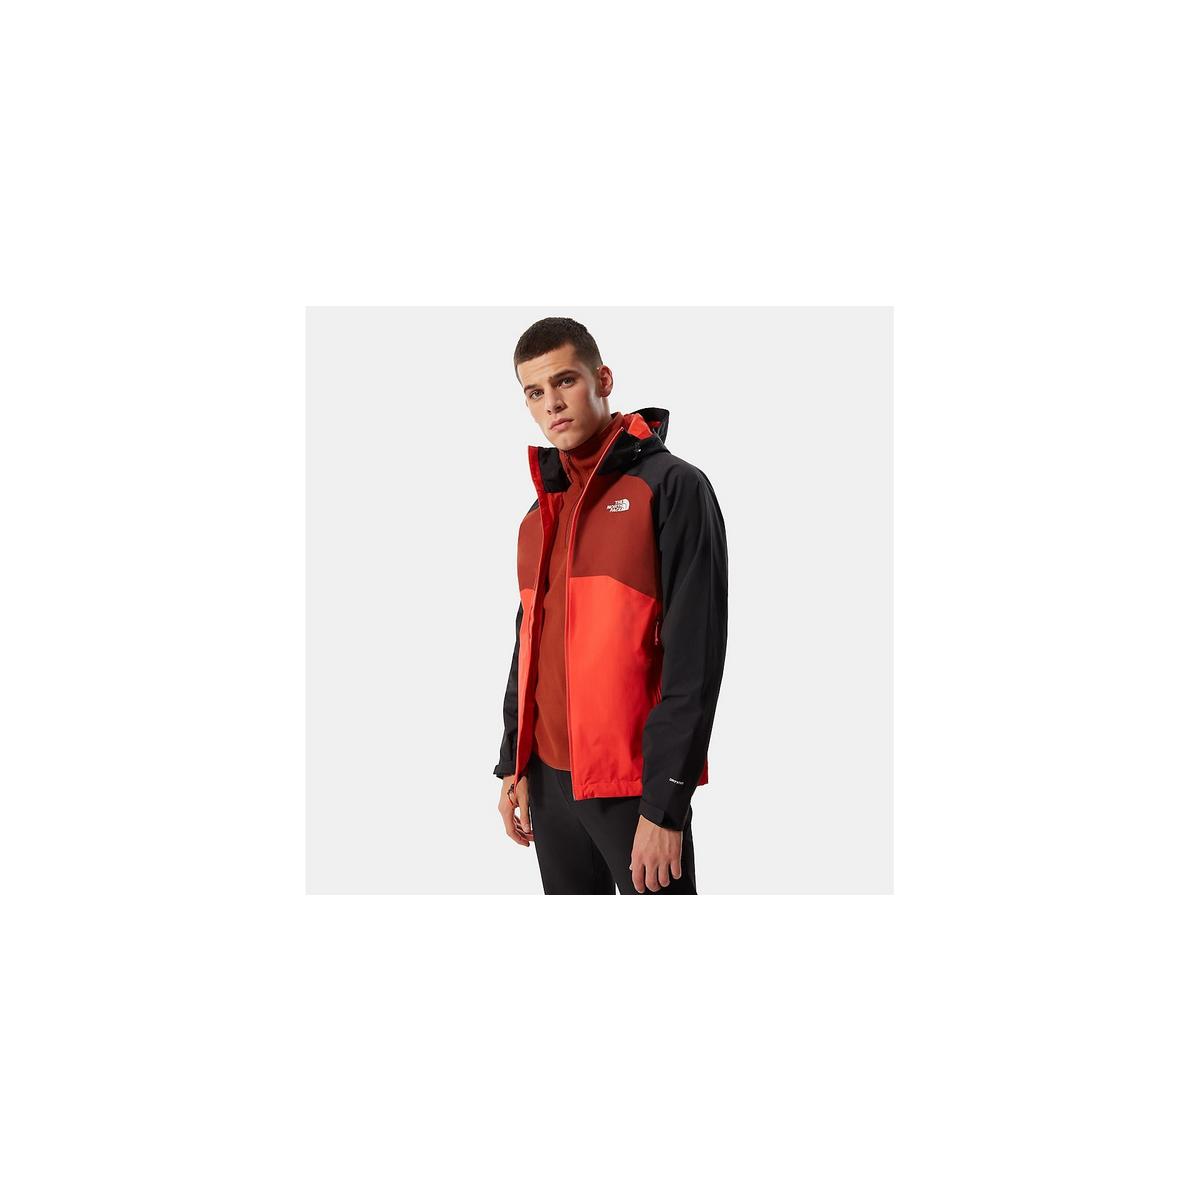 The North Face Men's Stratos Jacket - Black/Red